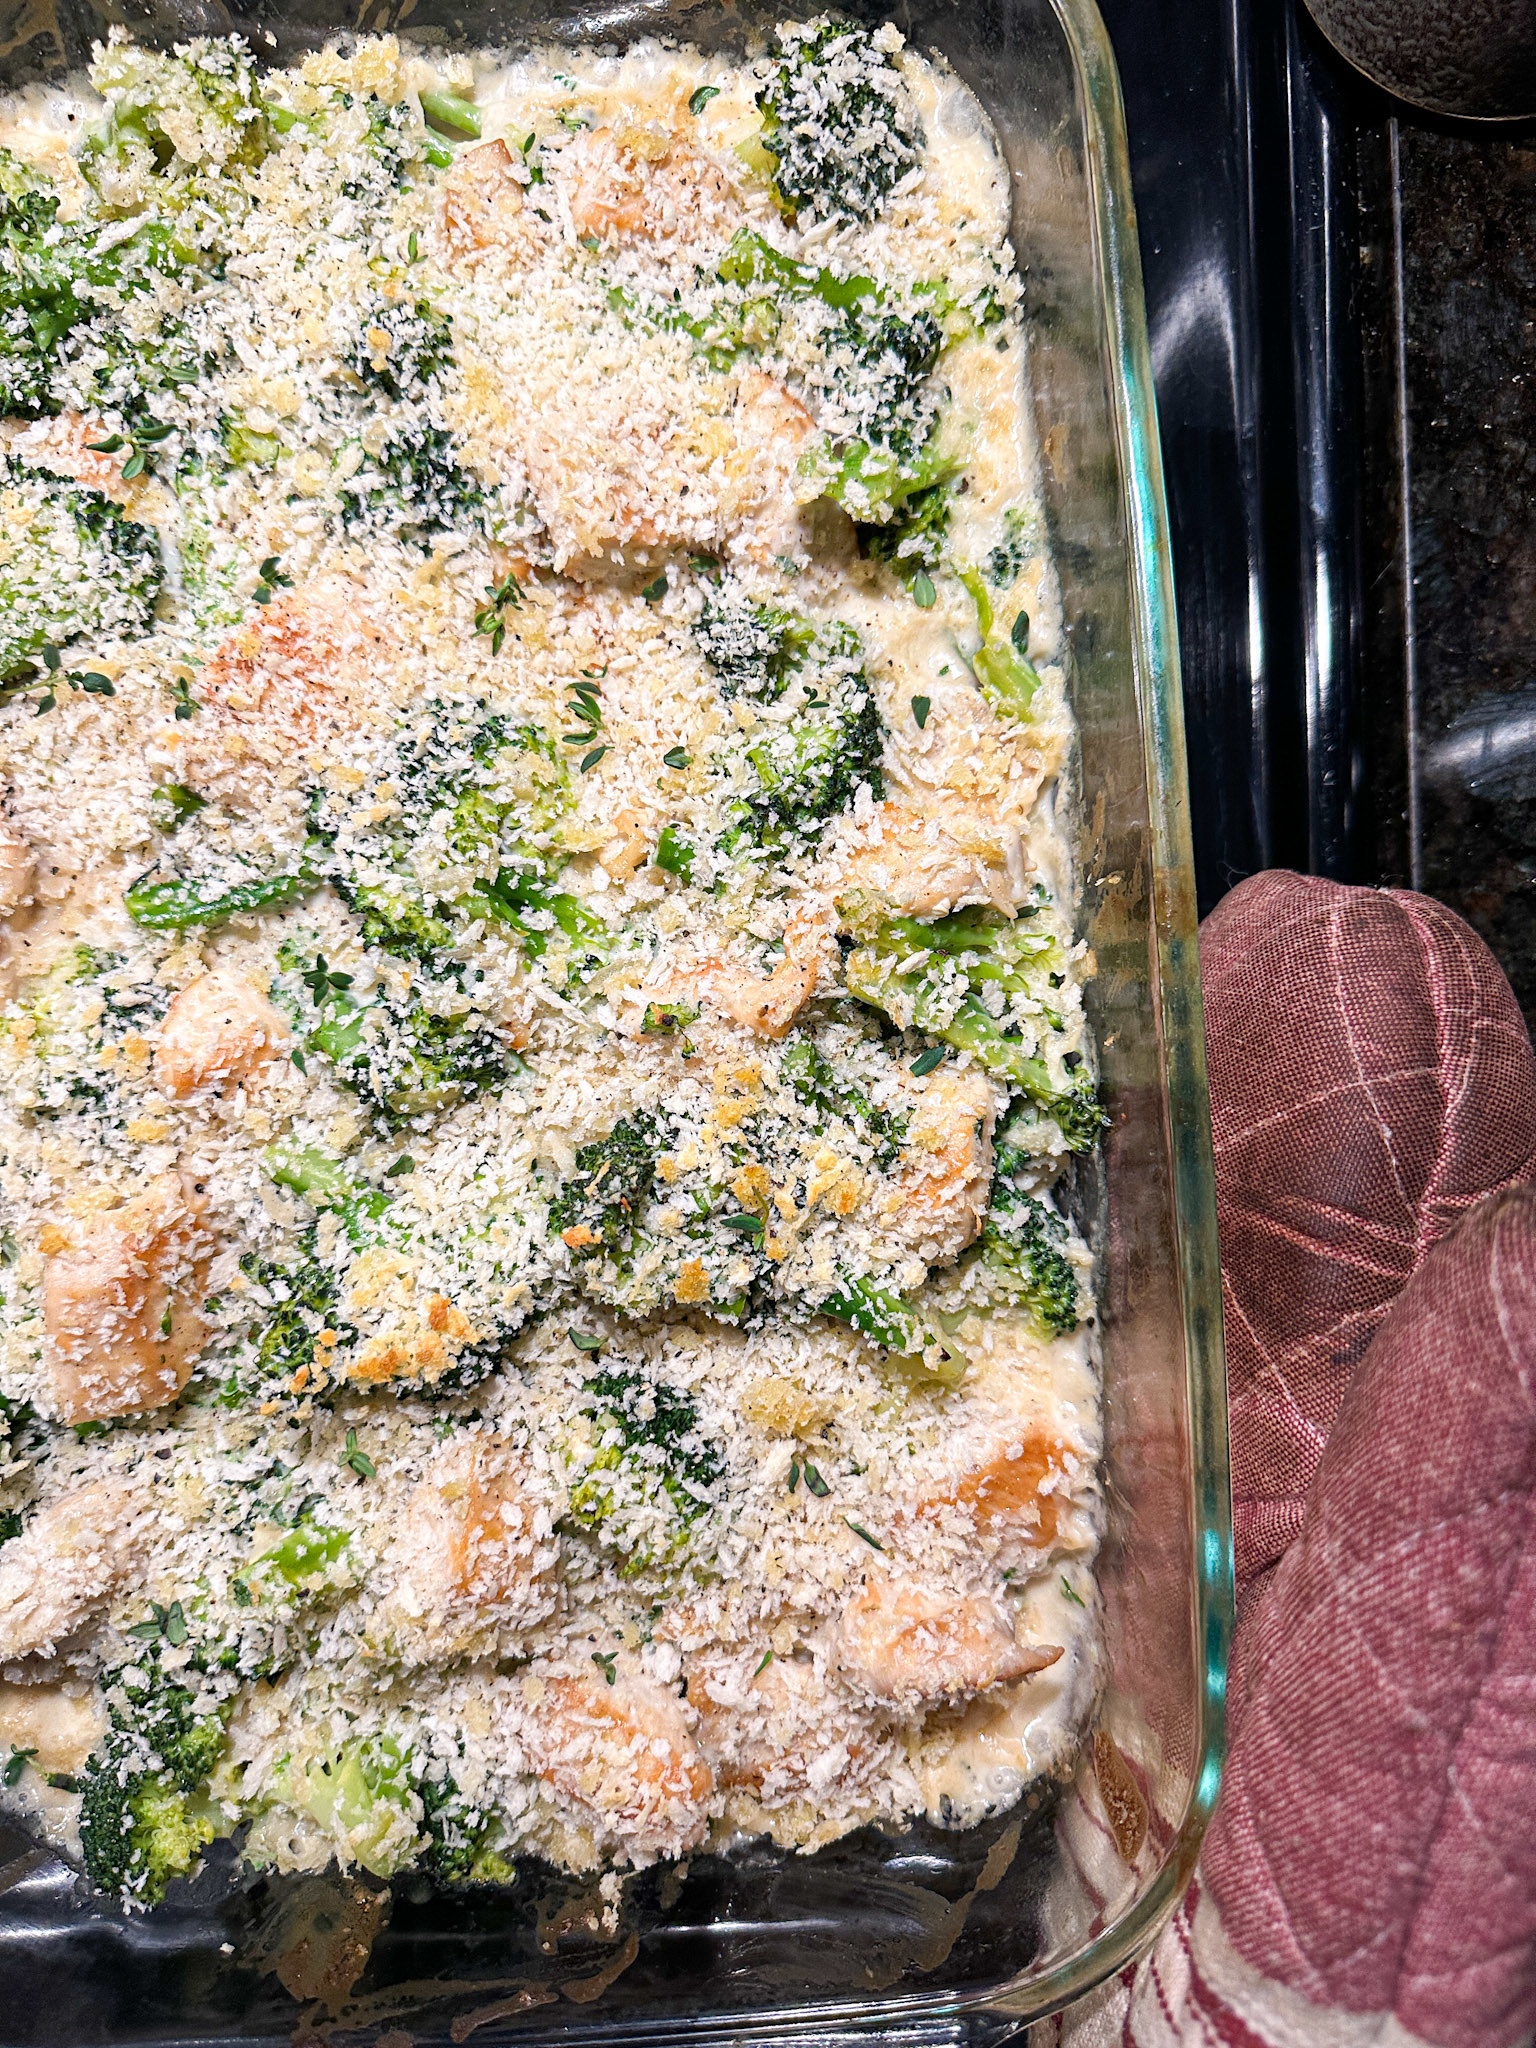 Casserole dish with chicken and broccoli casserole inside, topped with crispy bread crumbs